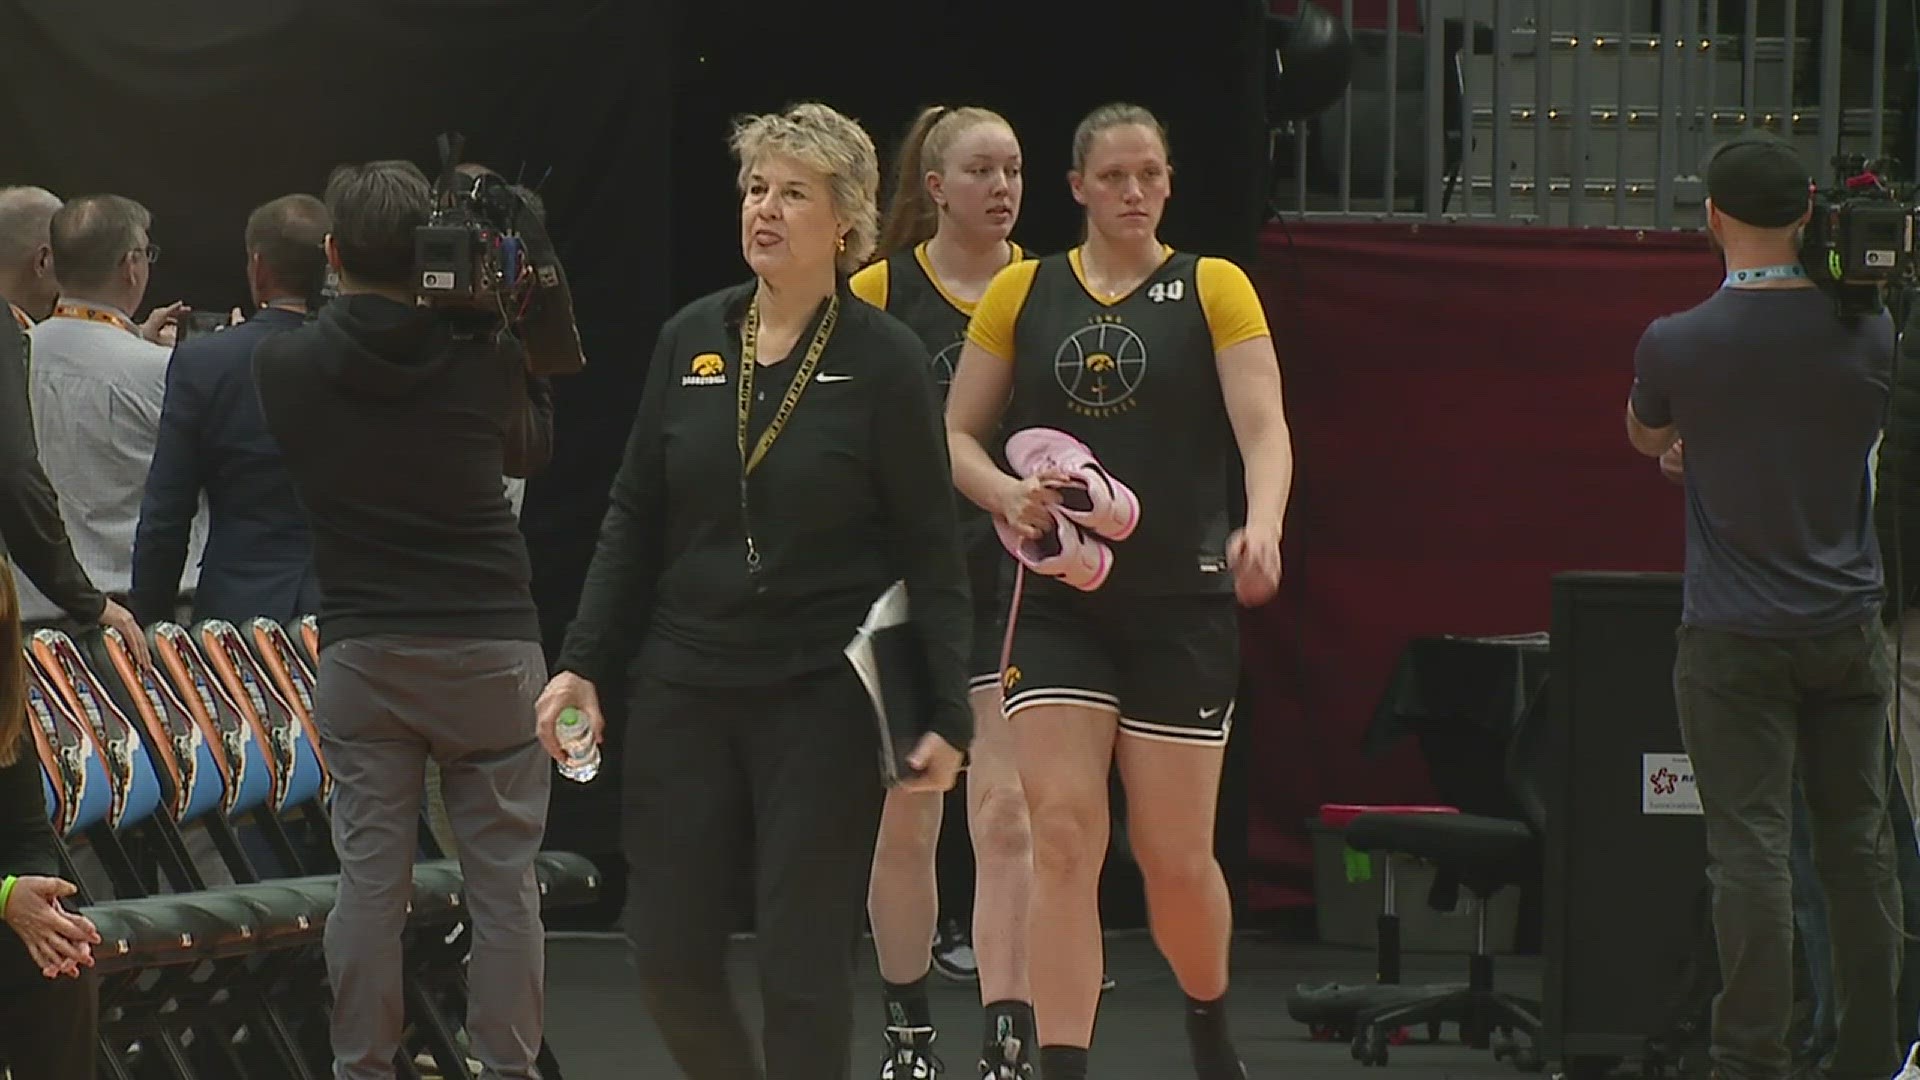 News 8 Sports' Jenna Minor caught up with some players in the locker room to learn more about the culture Bluder has cultivated for the team and what it means.